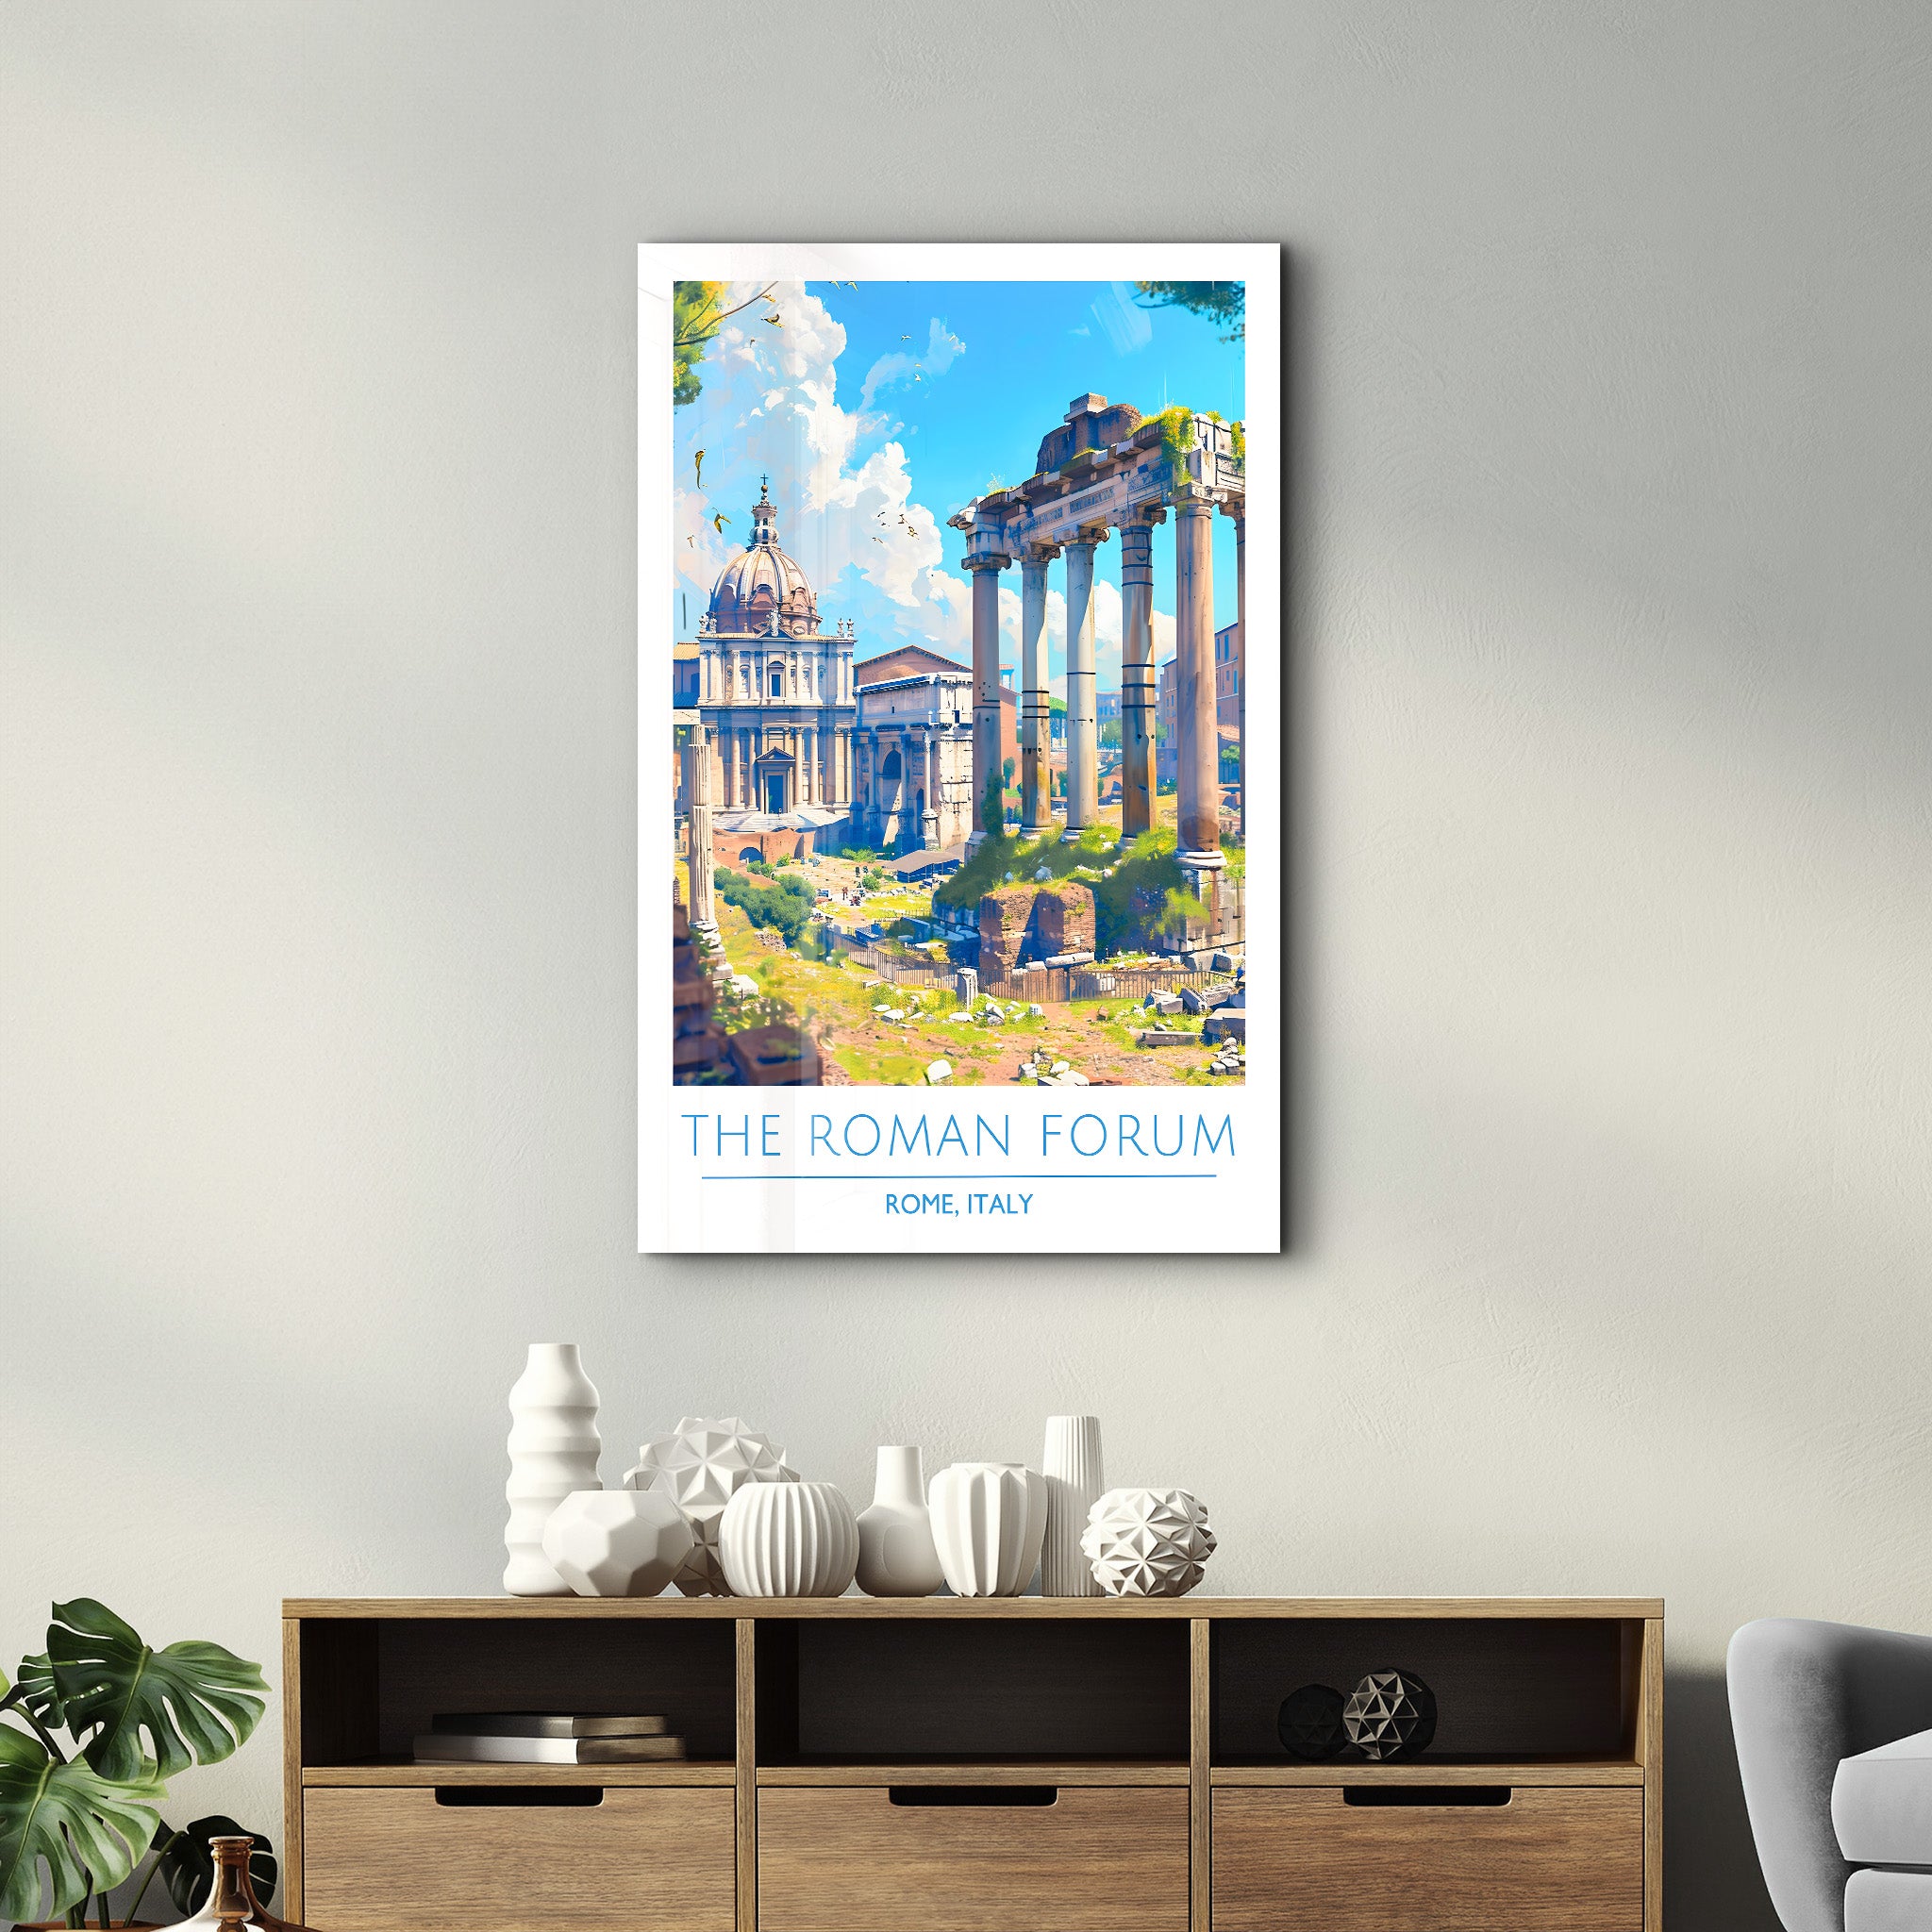 The Roman Forum-Rome Italy-Travel Posters | Glass Wall Art